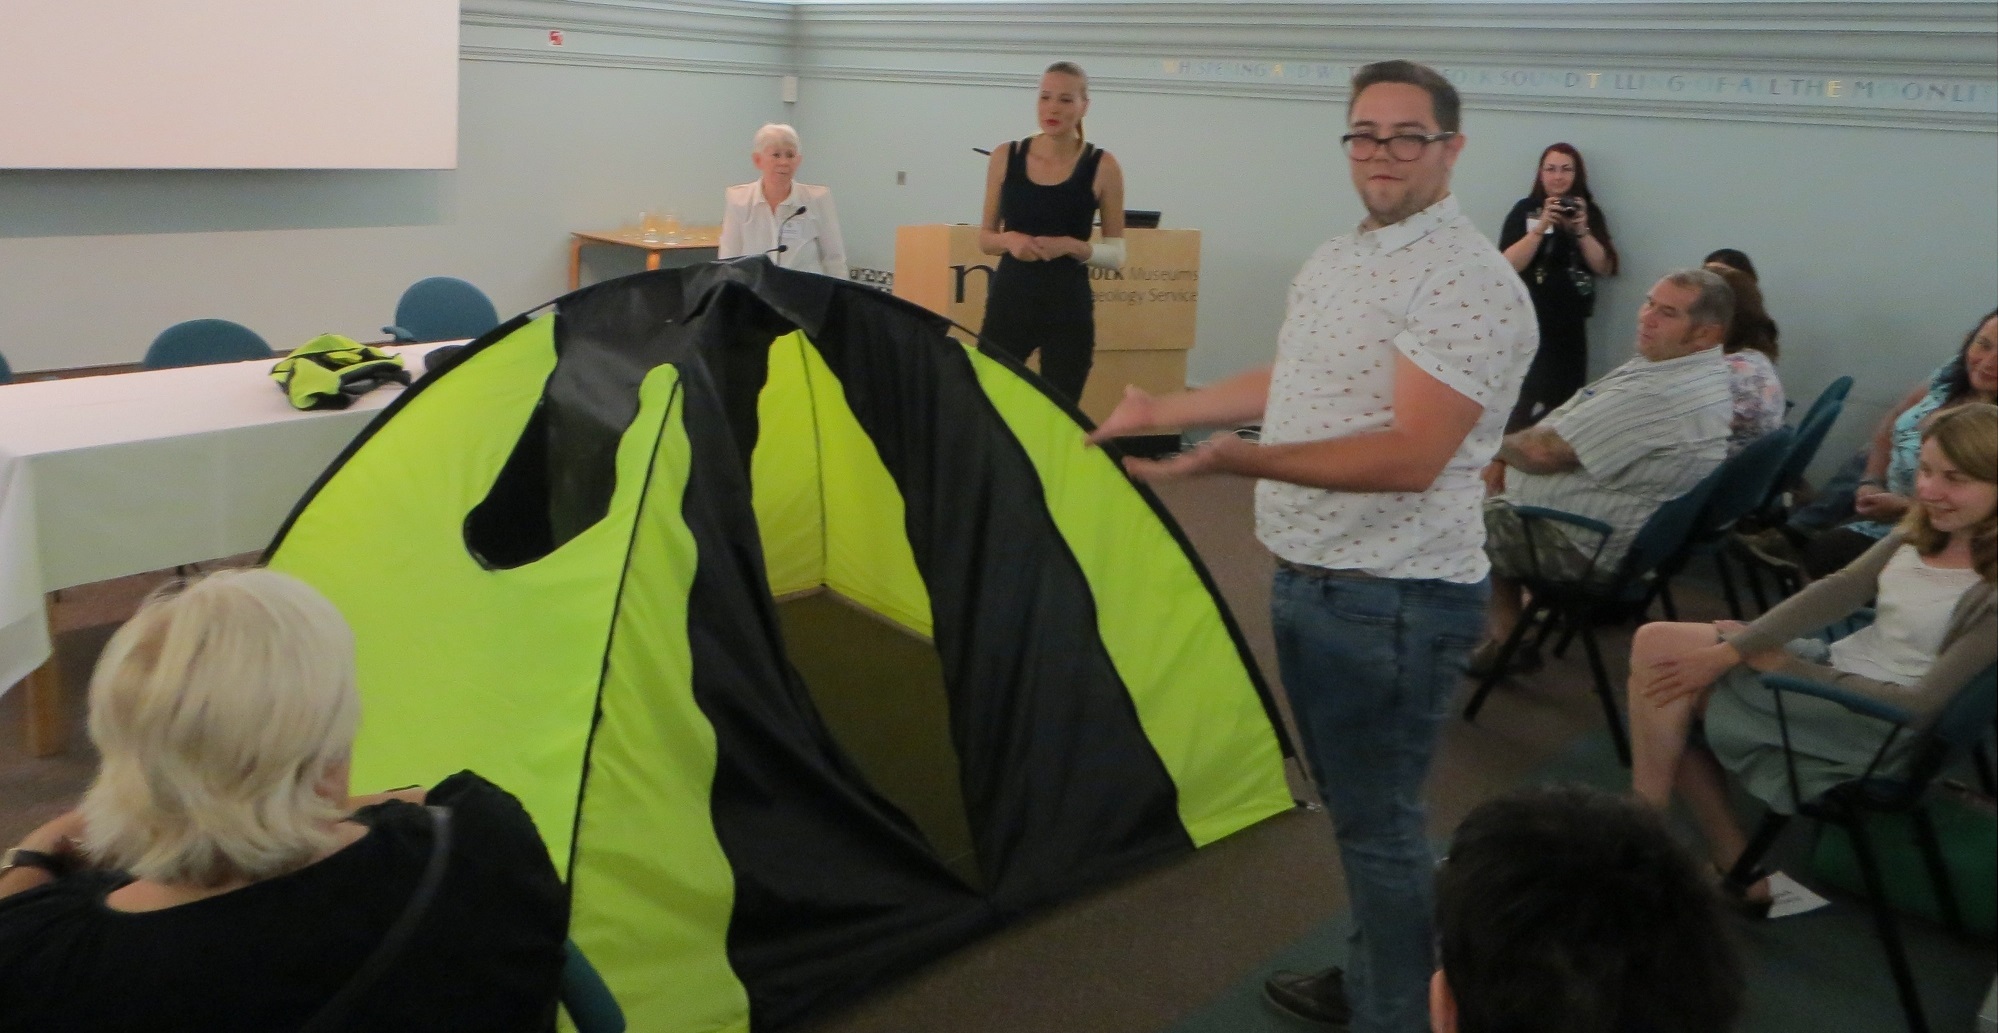 Winner of the Student Design Awards - Coat becomes a tent